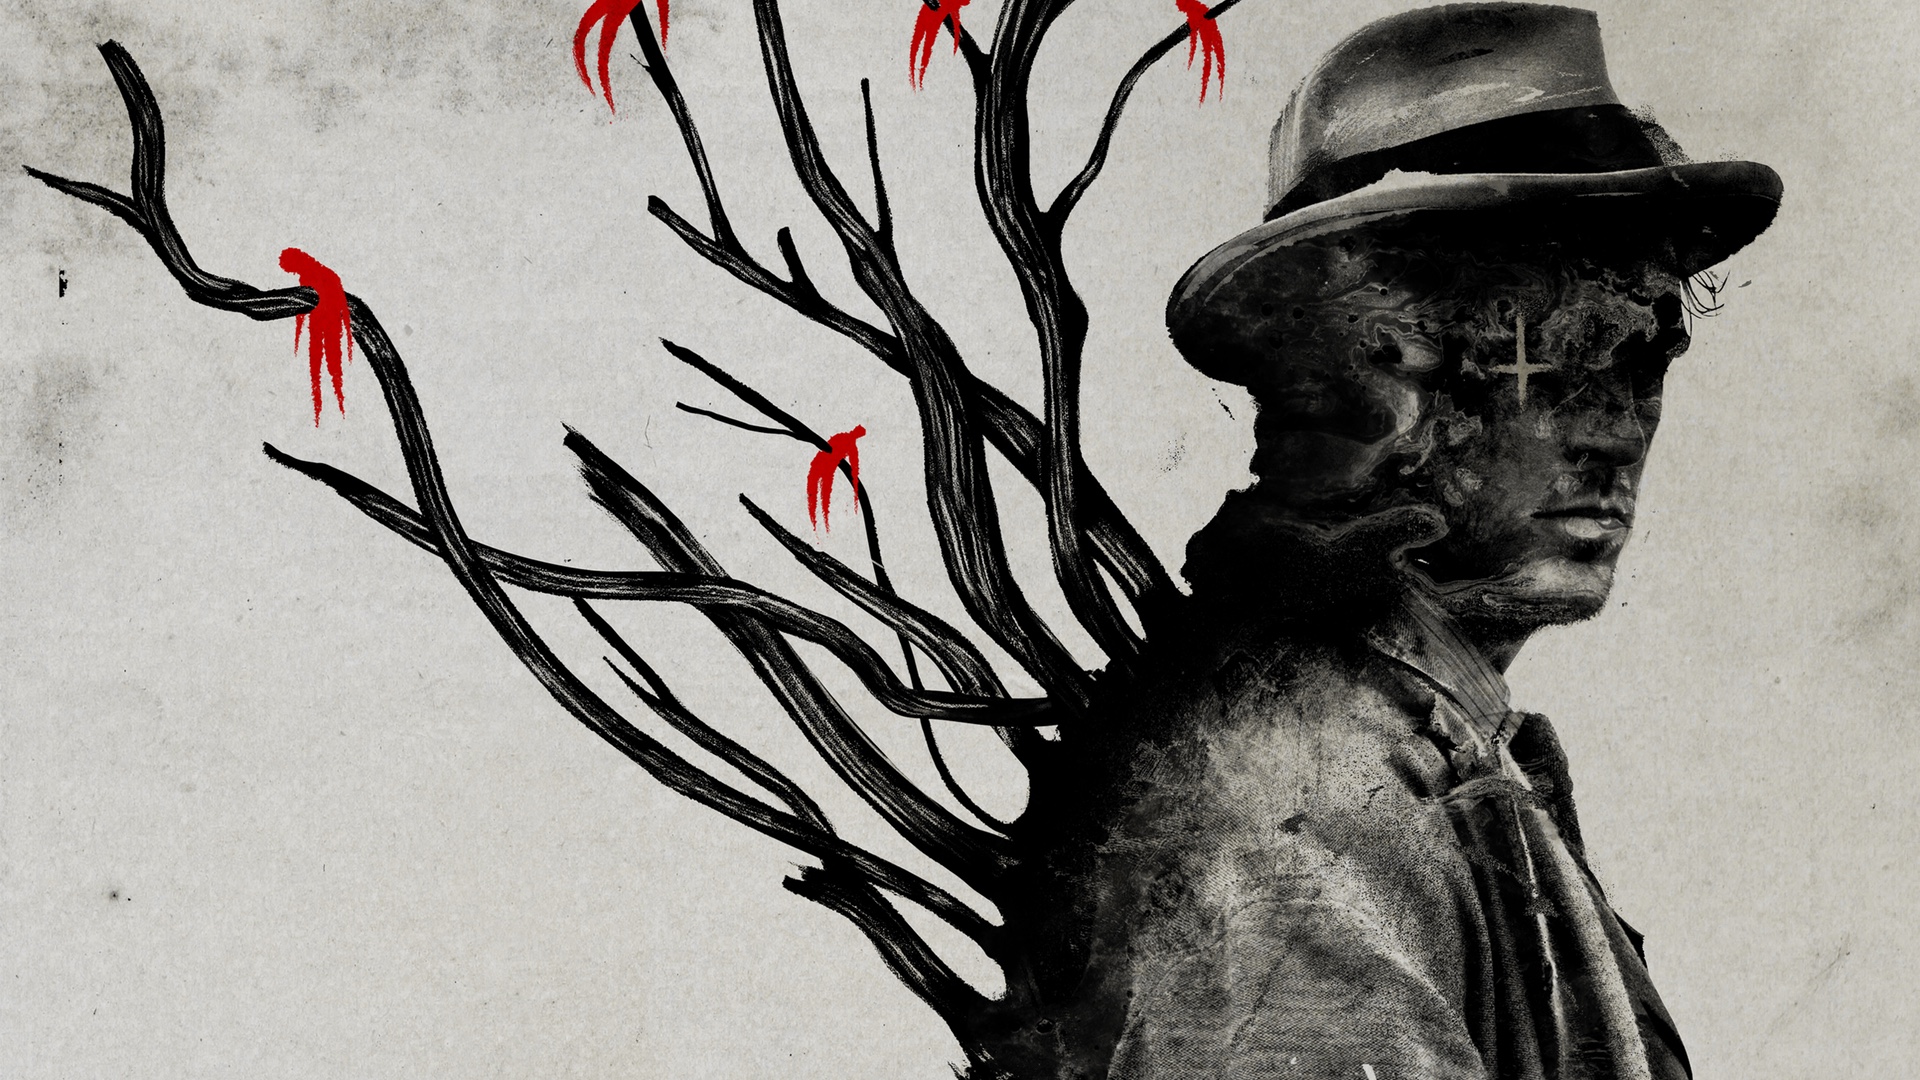 Poster Art For The Cult Thriller APOSTLE and Director Gareth Evans